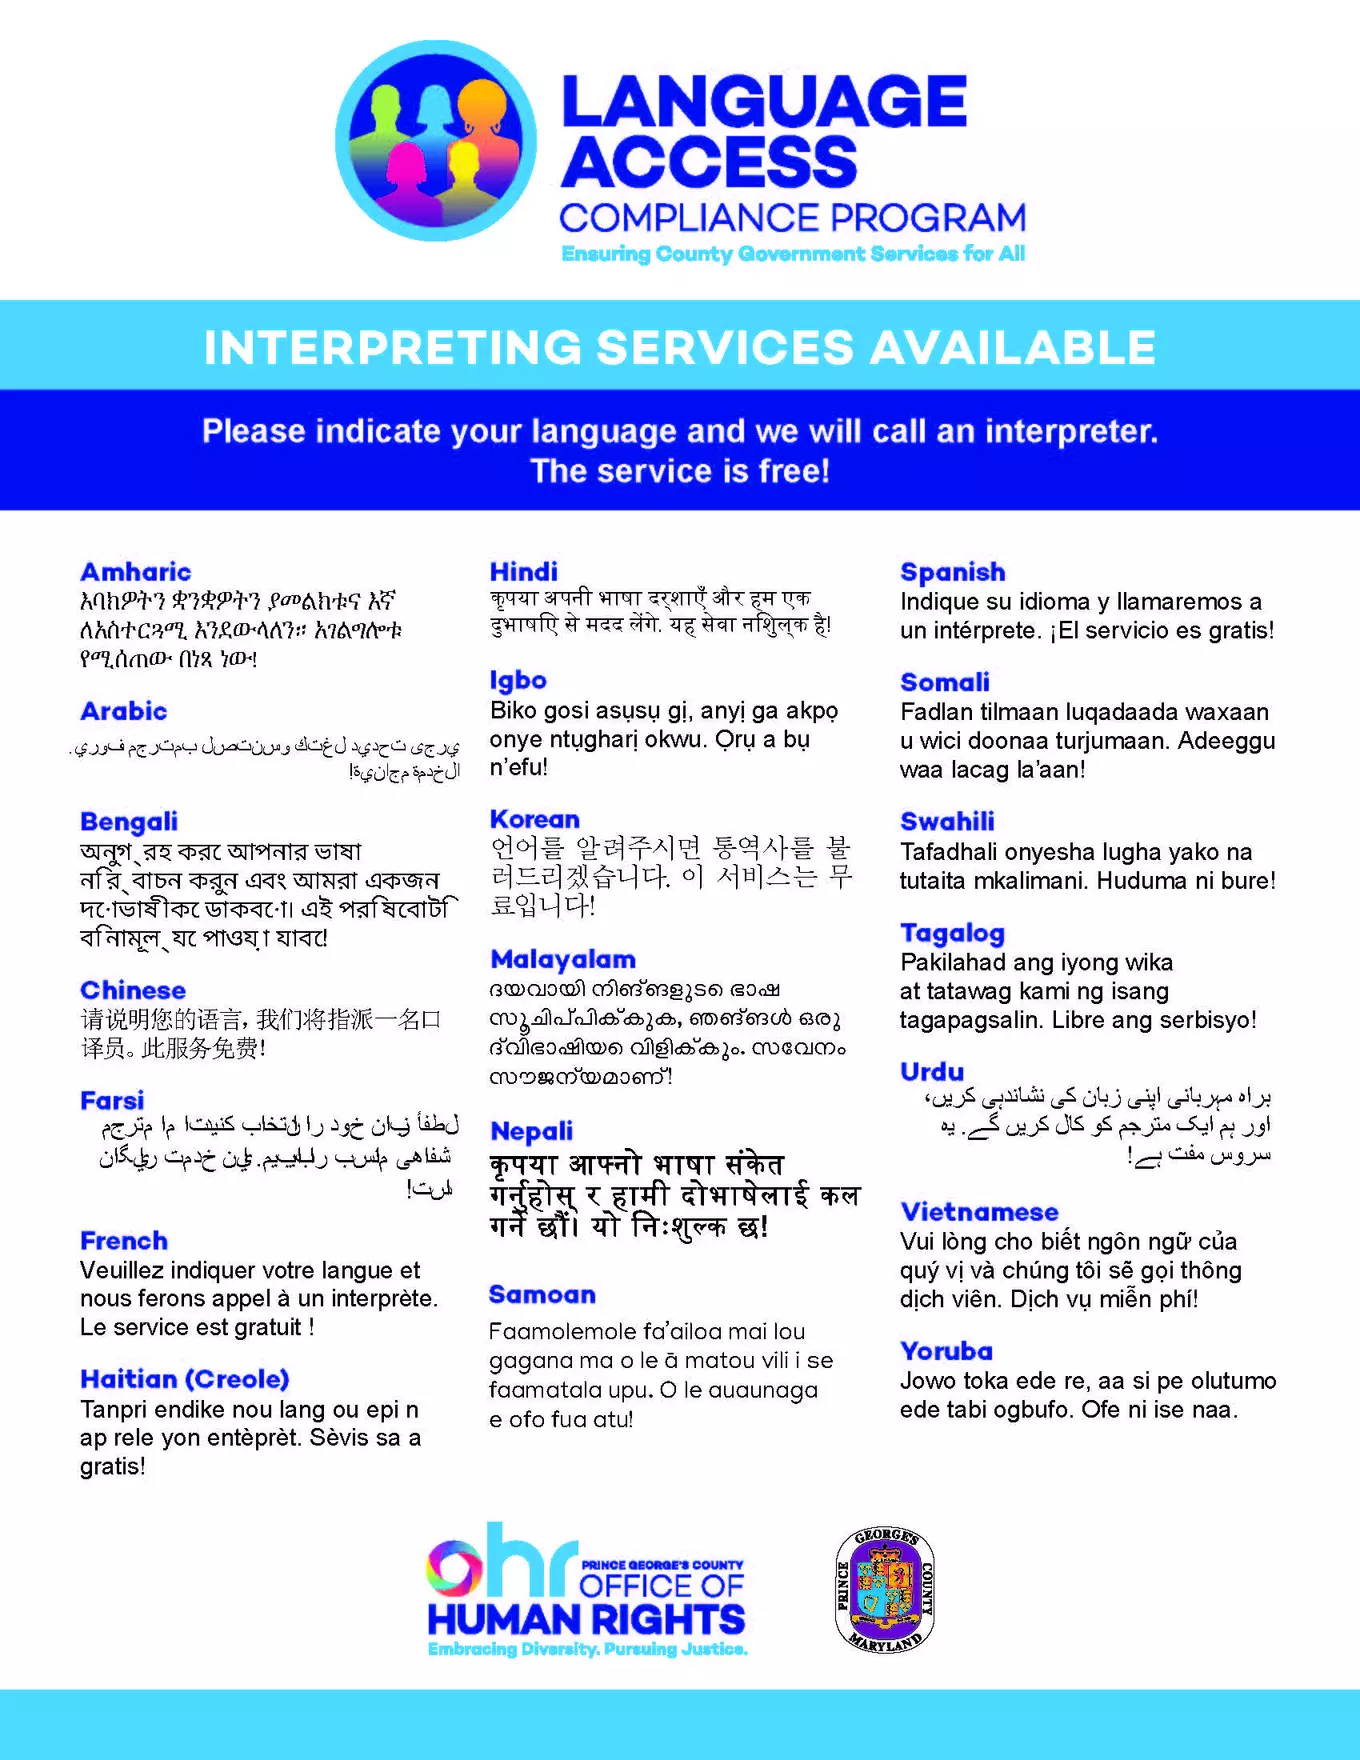 Language Access Poster announcing in a number of languages that interpreting services are available